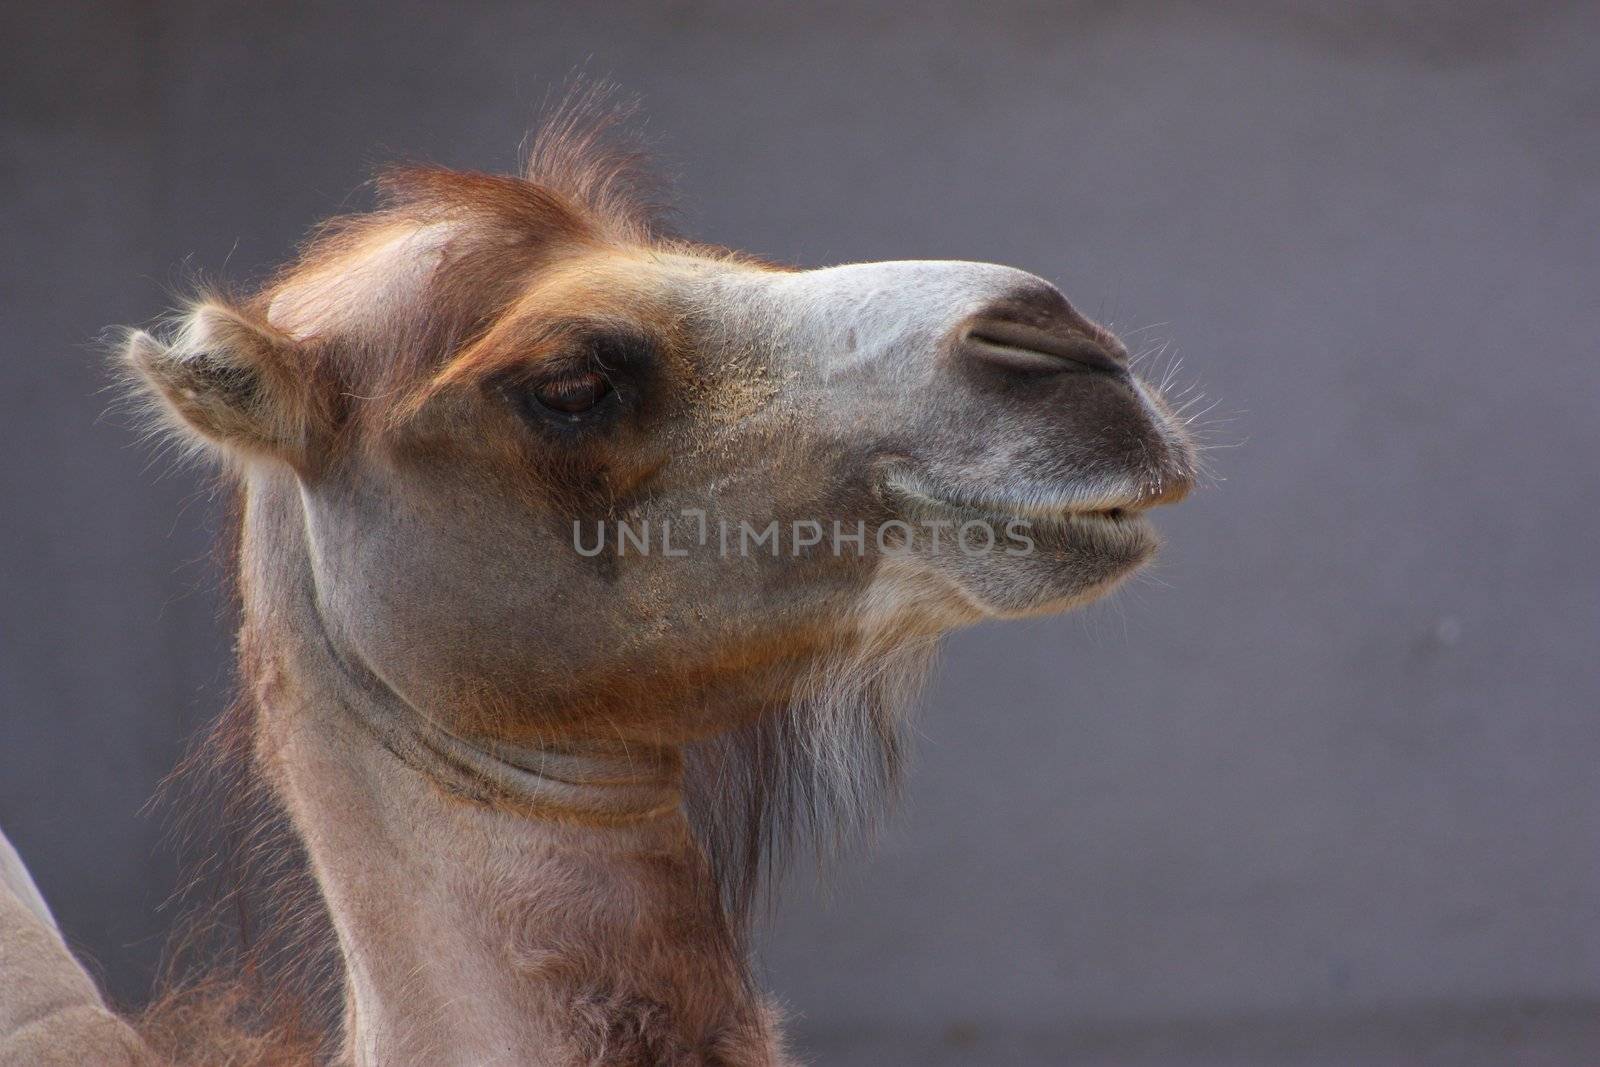 Head of a camel on a gray background